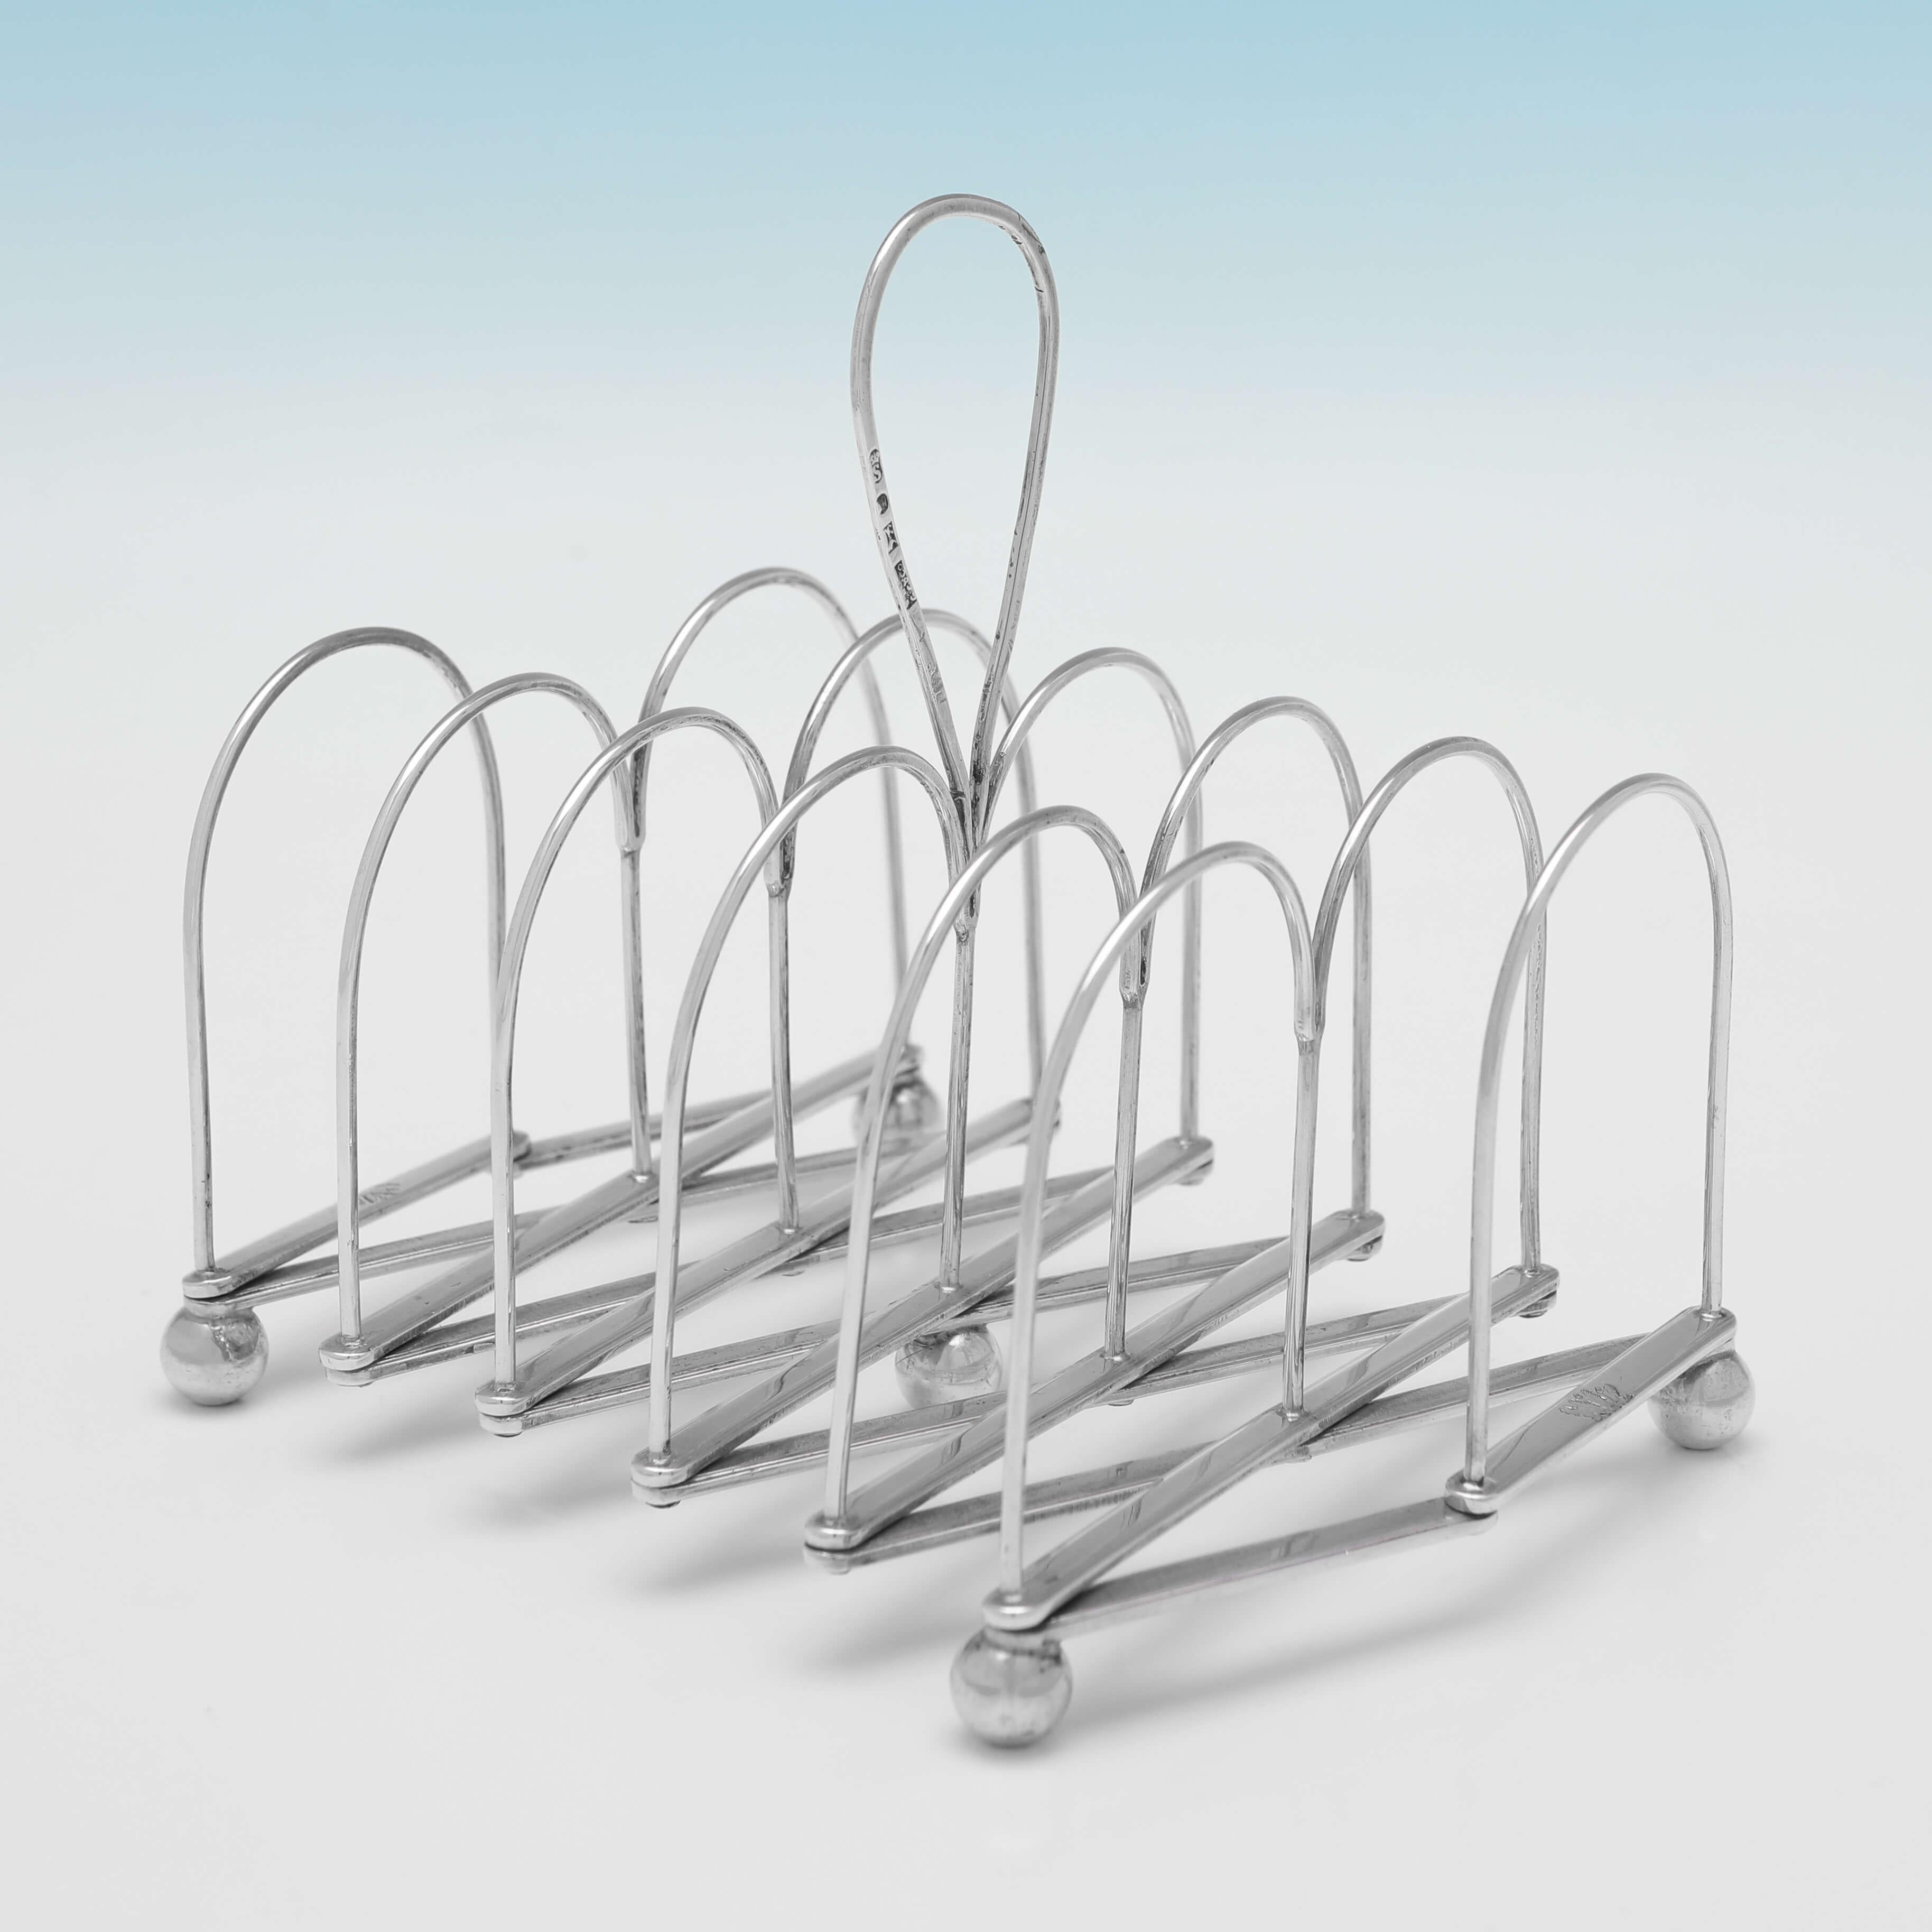 Hallmarked in Sheffield in 1807 by Roberts, Cadman & Co., this very handsome, and rare to find, Antique Sterling Silver Extending Toast Rack, is plain in design, and stands on four ball feet. 

The toast rack measures 5.5